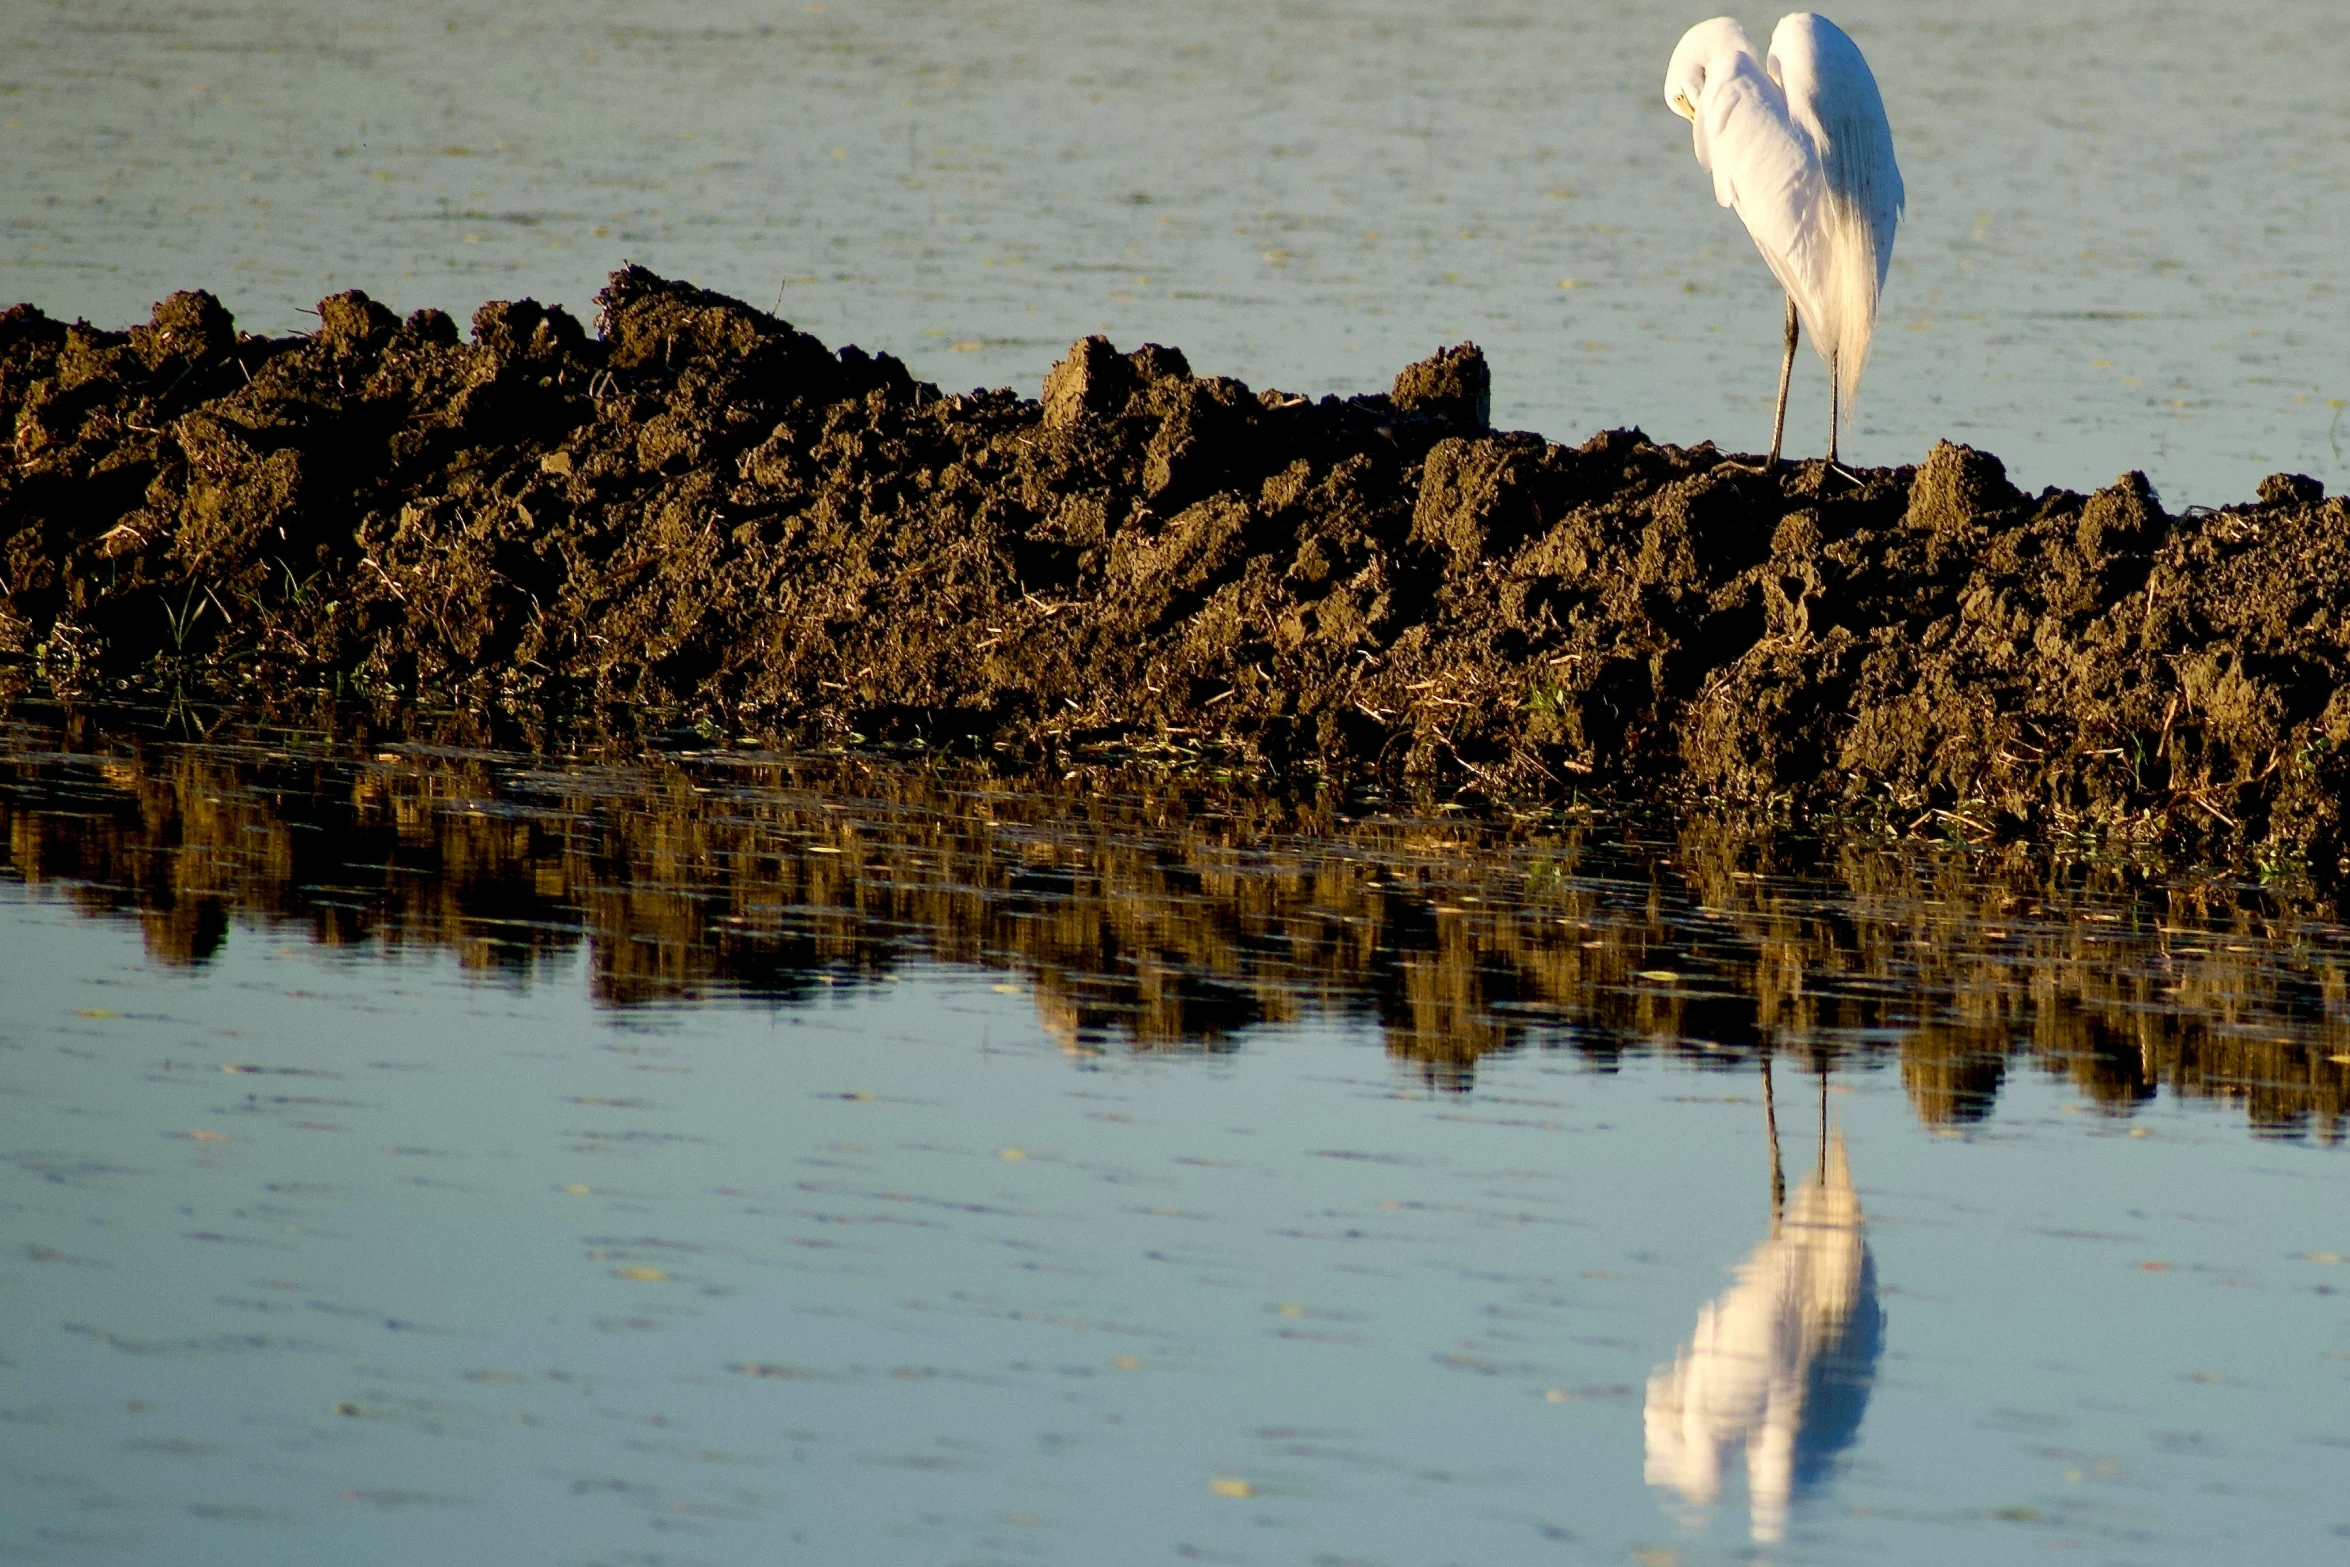 white heron standing on a rock with a reflection in the water